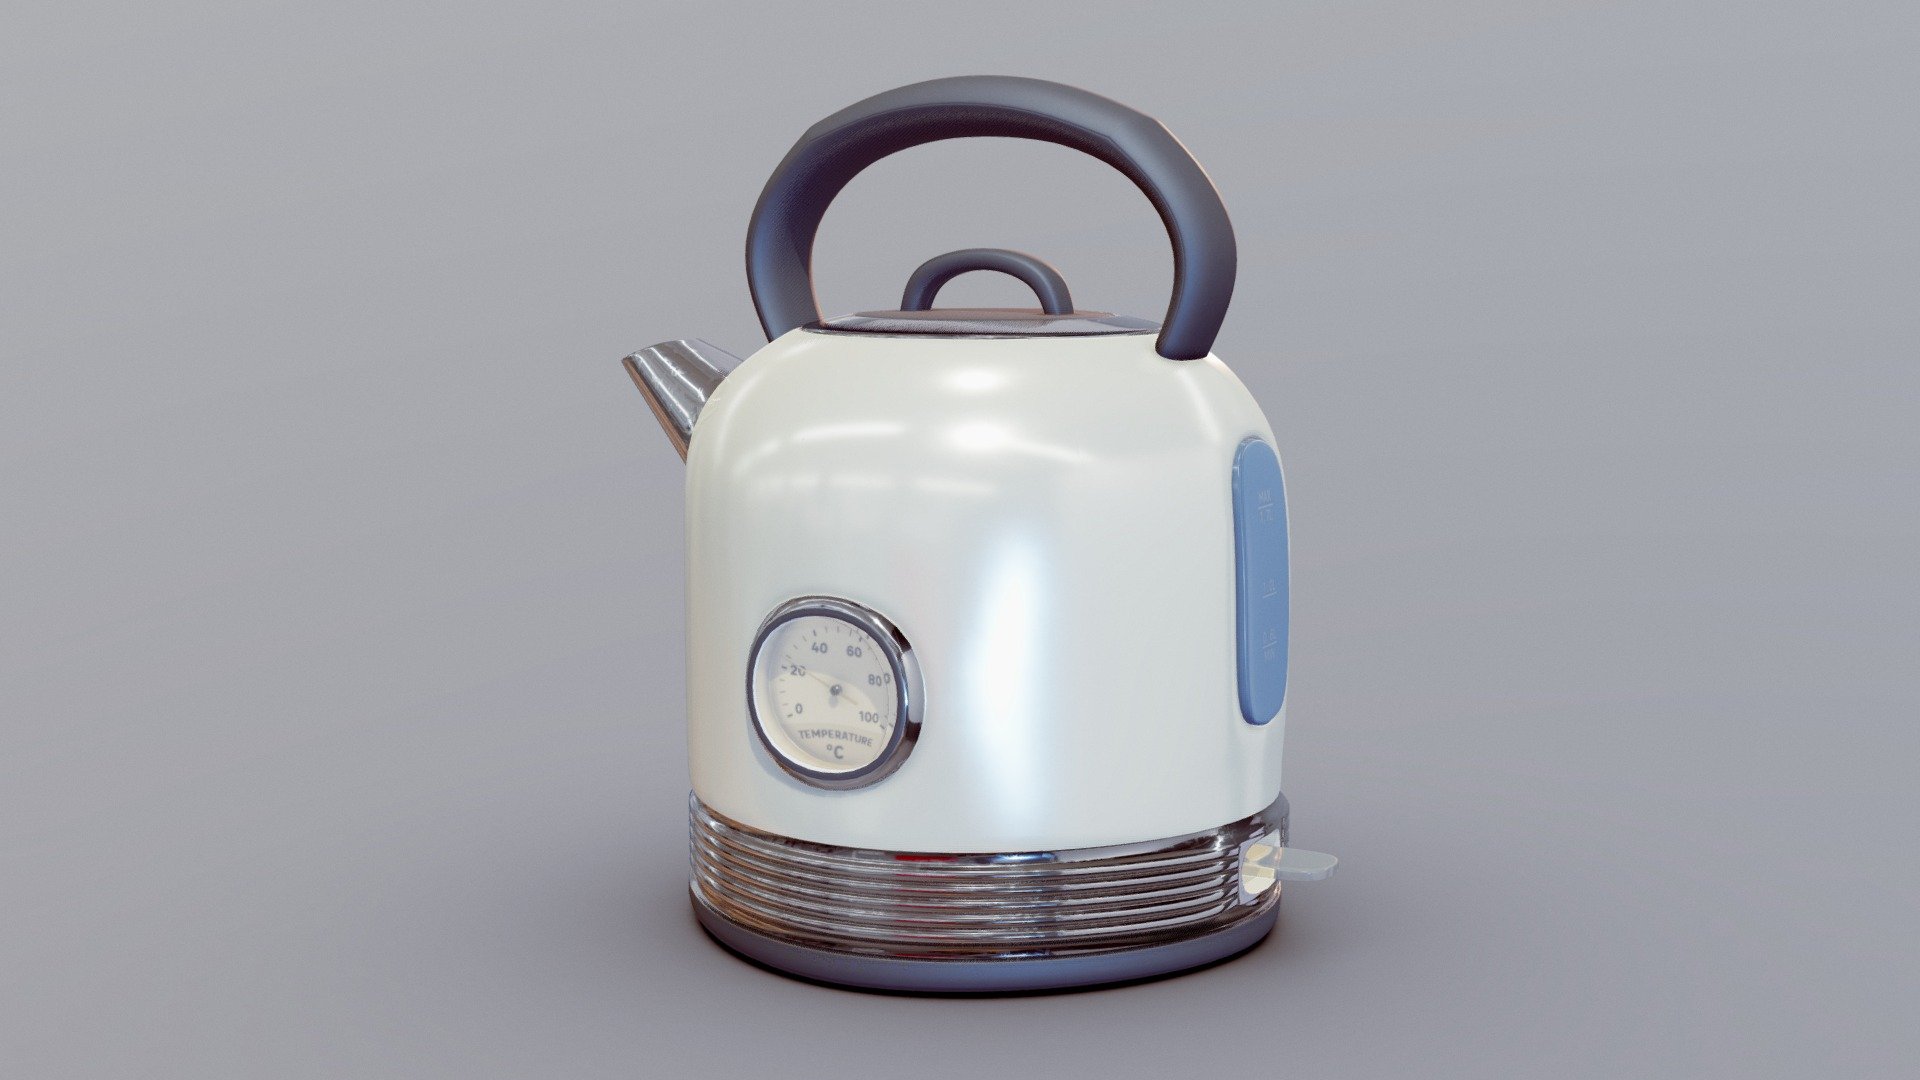 Low Poly PBR Game-Ready Model of a Teapot KitfortKT.

Technical Info:



Textures: In the scene included 5 textures: Base Color (Diffuse), Normal Map, Glossiness (Inverted of Roughness), Metalness, Opacity. The resolution of the textures is 2048x2048. File format: PNG.



Polygons Count: 16,132 Polys.



Original Messures: Width: 21.9 cm (8,2 ″), Depth: 16.8 cm (6,3 &ldquo;), Height: 22.8 cm (9 &ldquo;)



UV Mapped: Yes



Original Model Format: FBX



Description:
The ratio of the high power of the kettle and the optimal volume allows you to quickly boil water for a drink. The design of the kettle includes a thermometer for the convenience of brewing various types of tea or medicinal herbs, which need their own suitable temperature.

The enlarged mouth and removable lid make it easy to fill the kettle and clean the inside. A heating indicator is provided. Protection against overheating, from dry start, when removed from the base 3d model